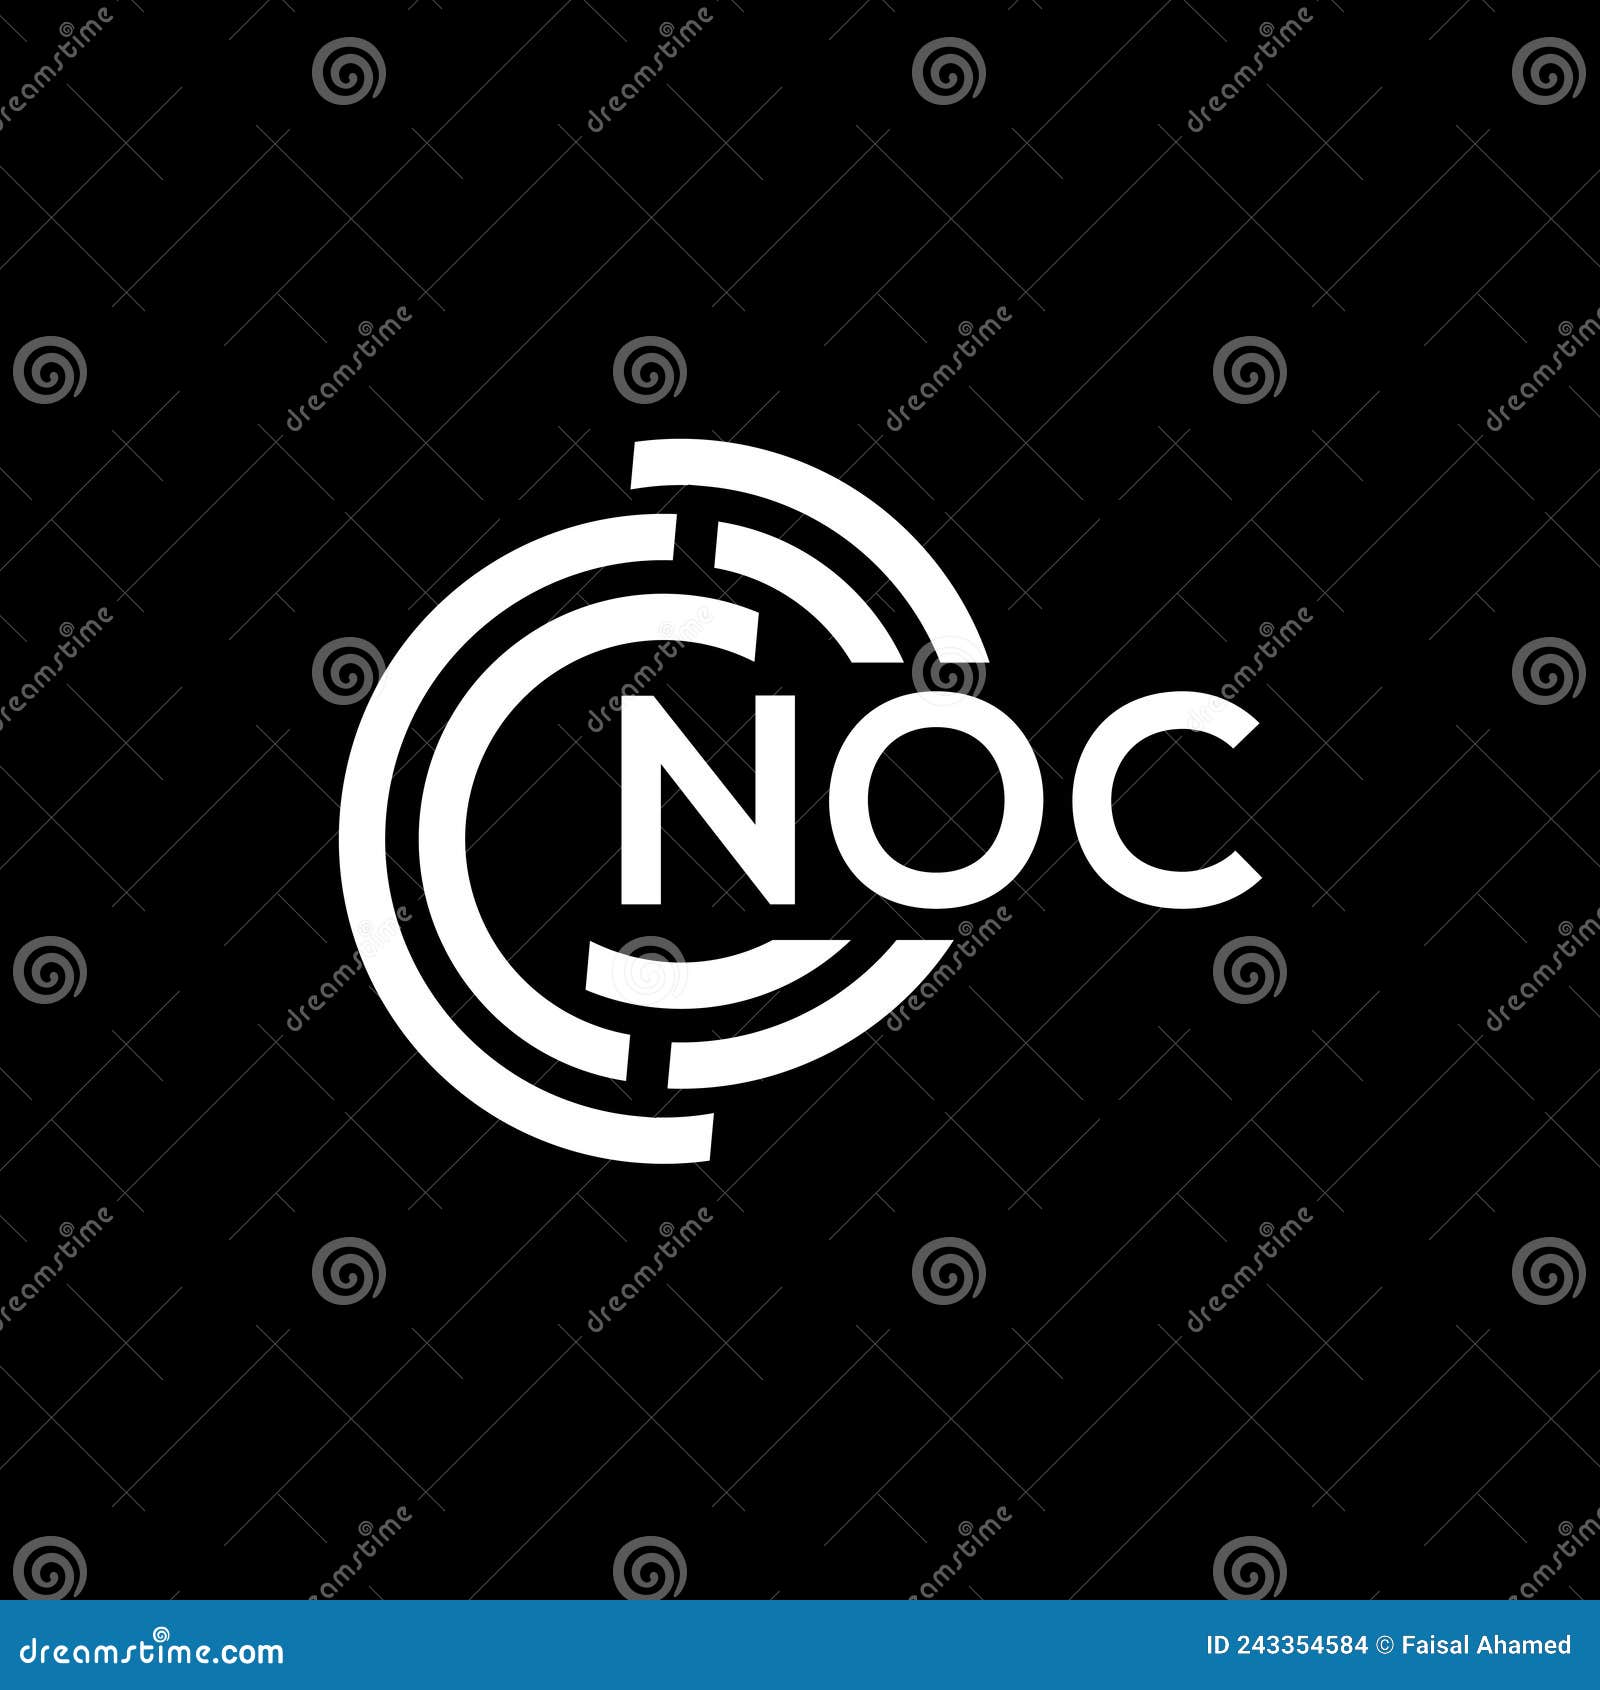 Noc png images | PNGWing